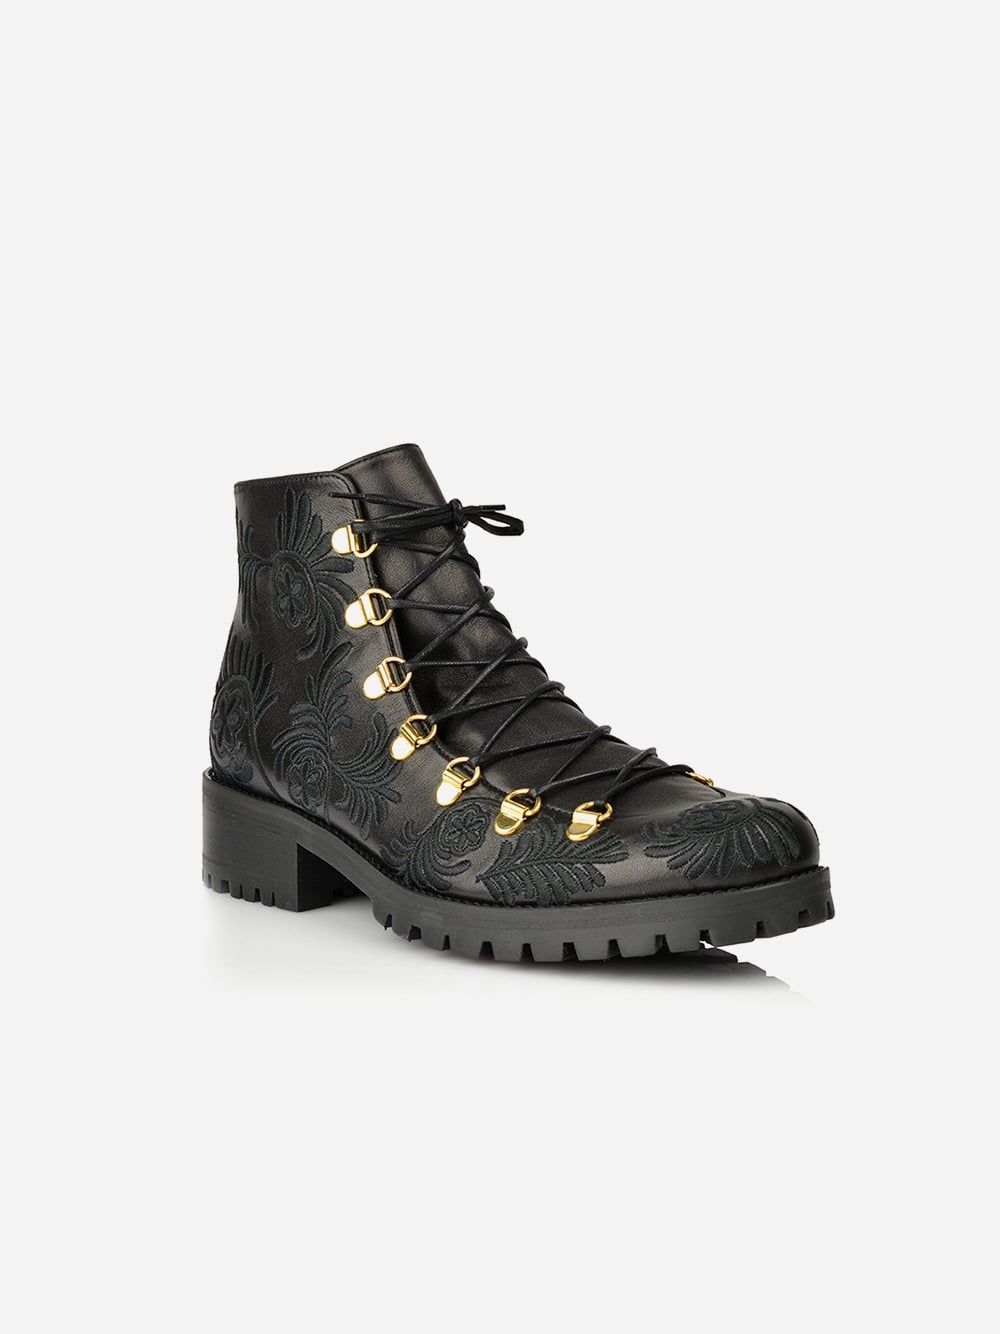 Black Embroidery Boots | JJ Heitor